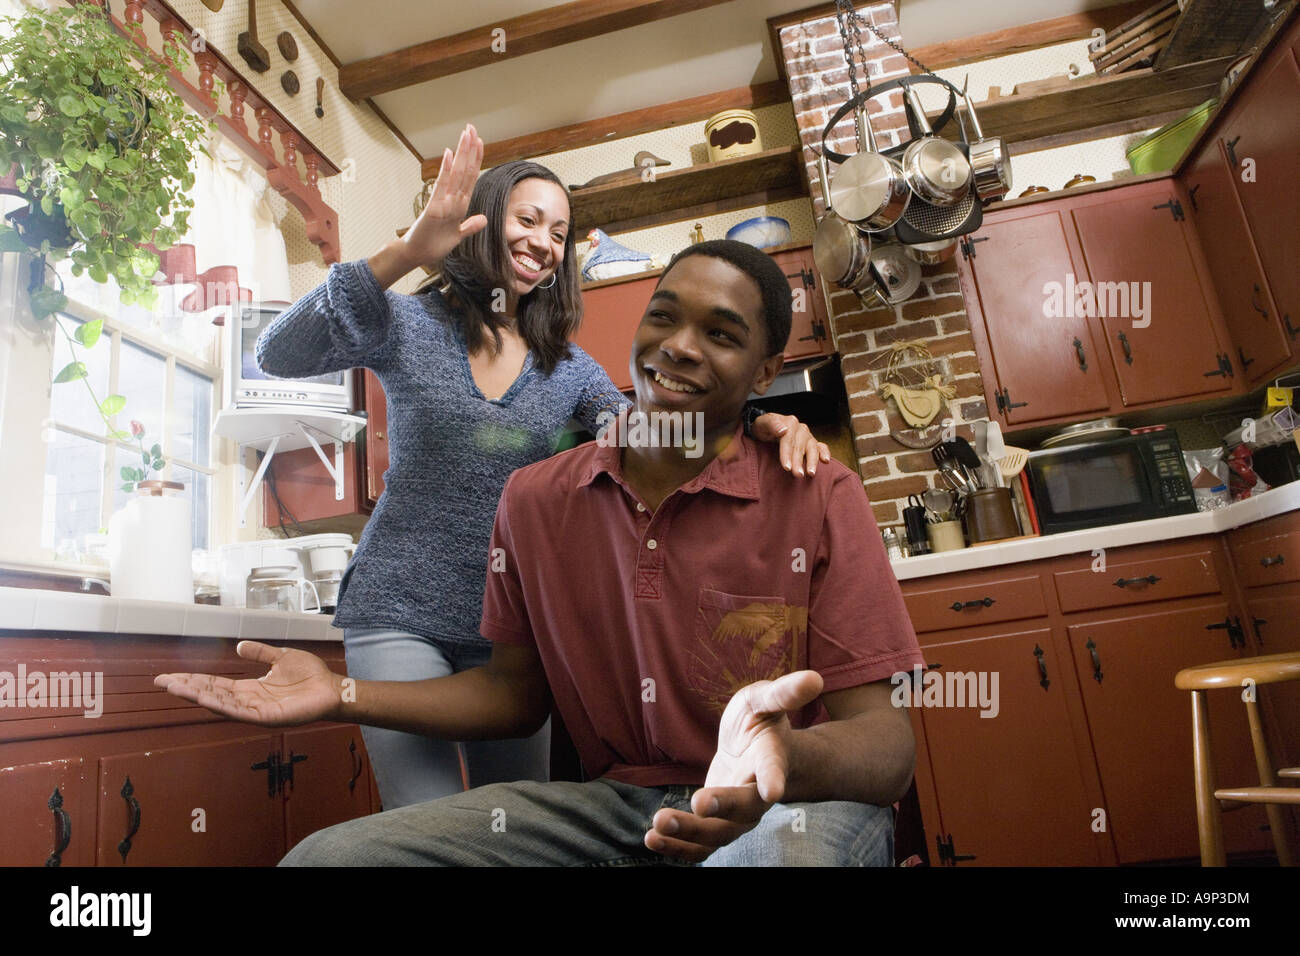 African American brother and sister laughing in kitchen Stock Photo